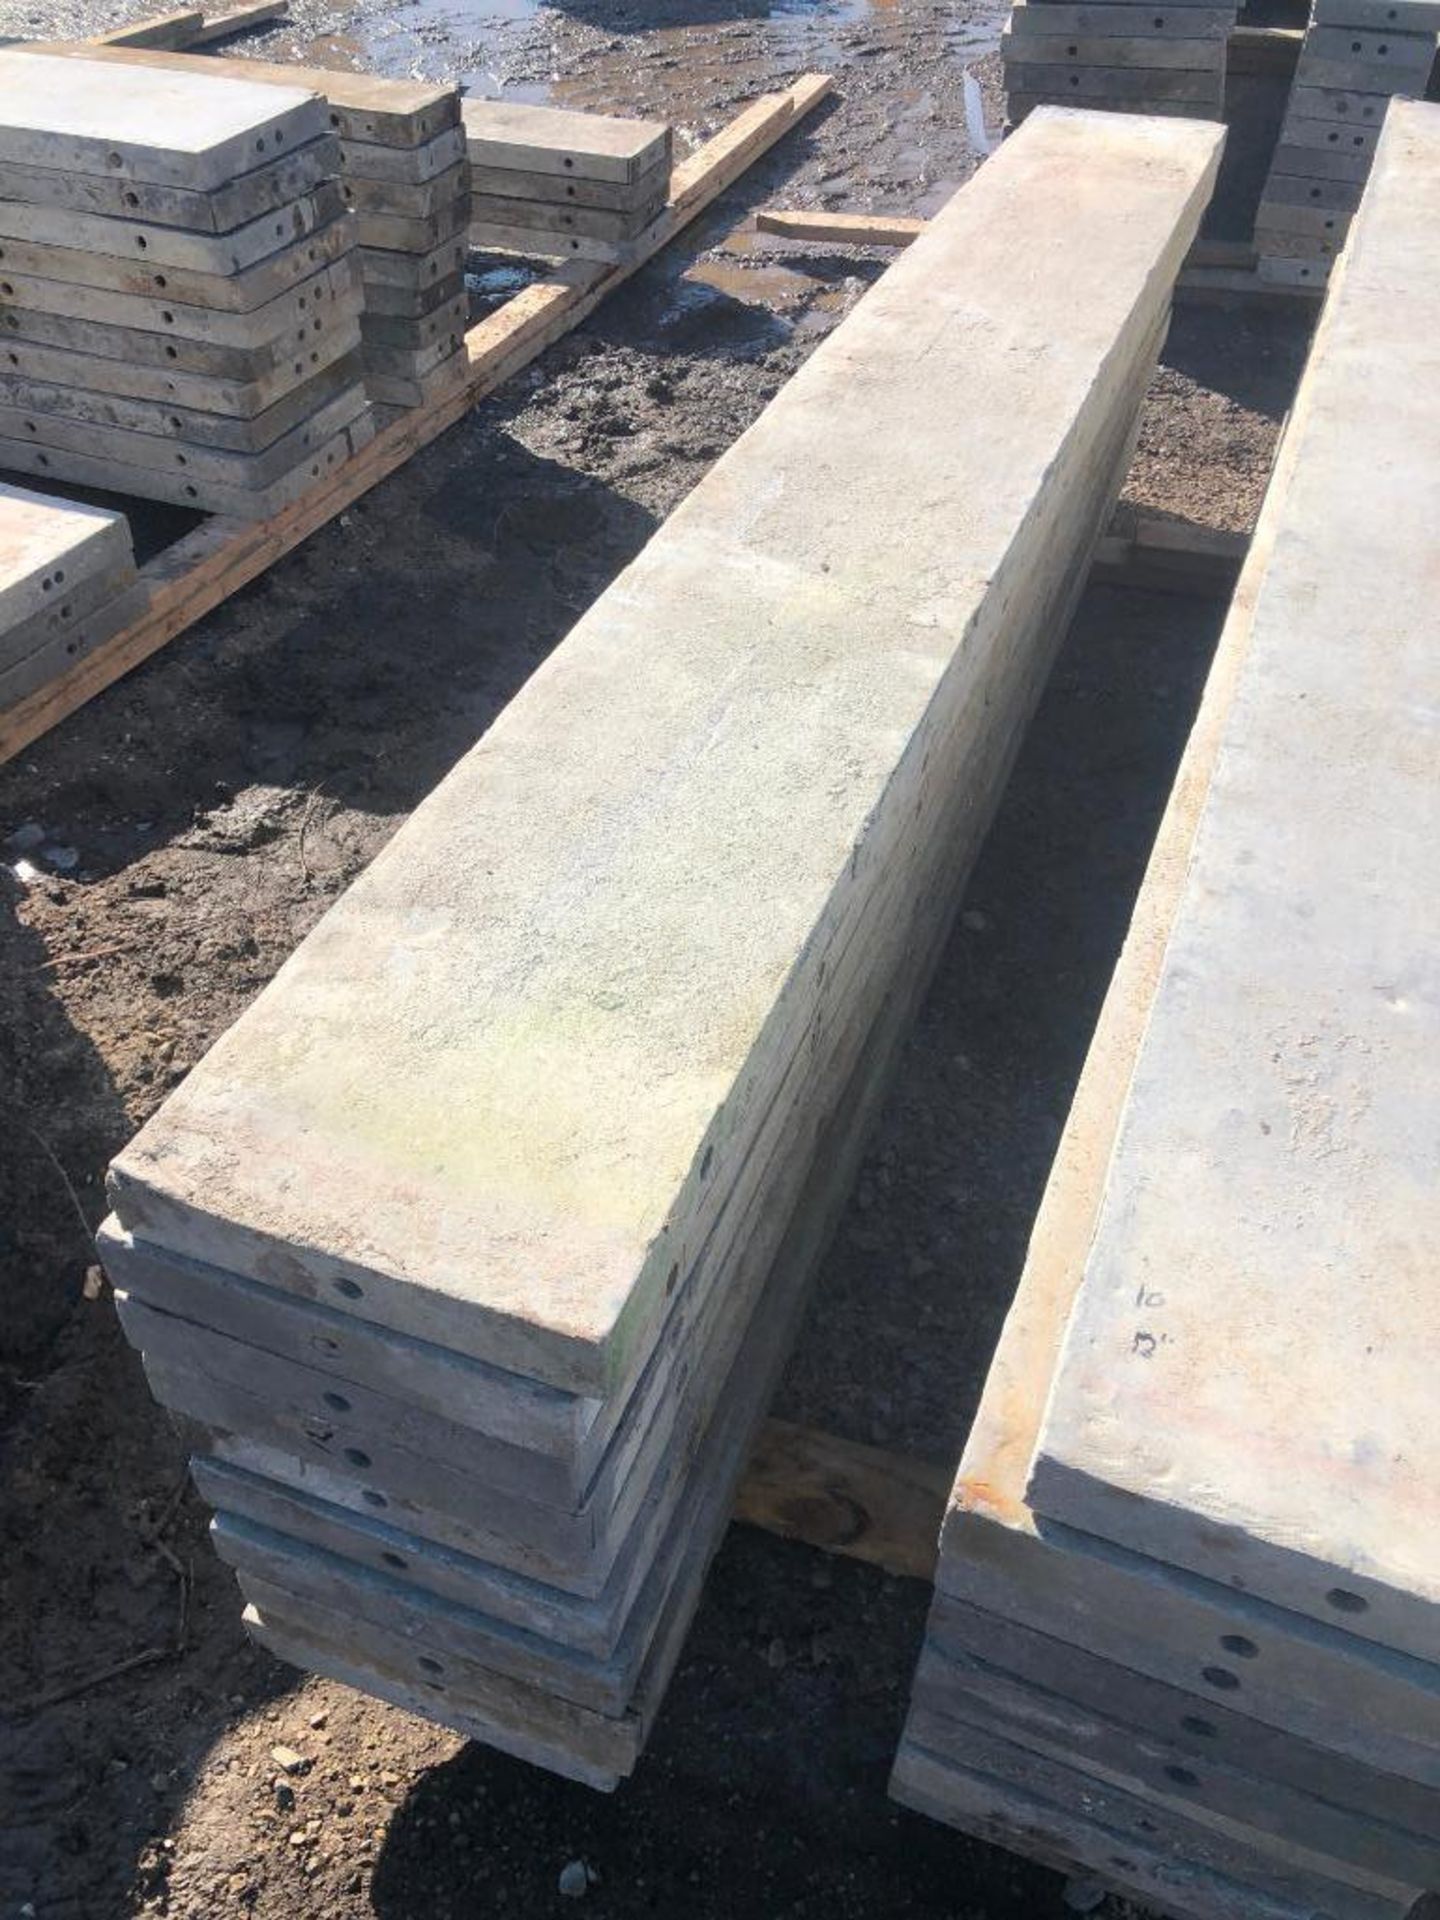 (10) 12" x 8' Western Aluminum Concrete Forms, Smooth 6-12 Hole Pattern, Located in Naperville, IL - Image 2 of 2